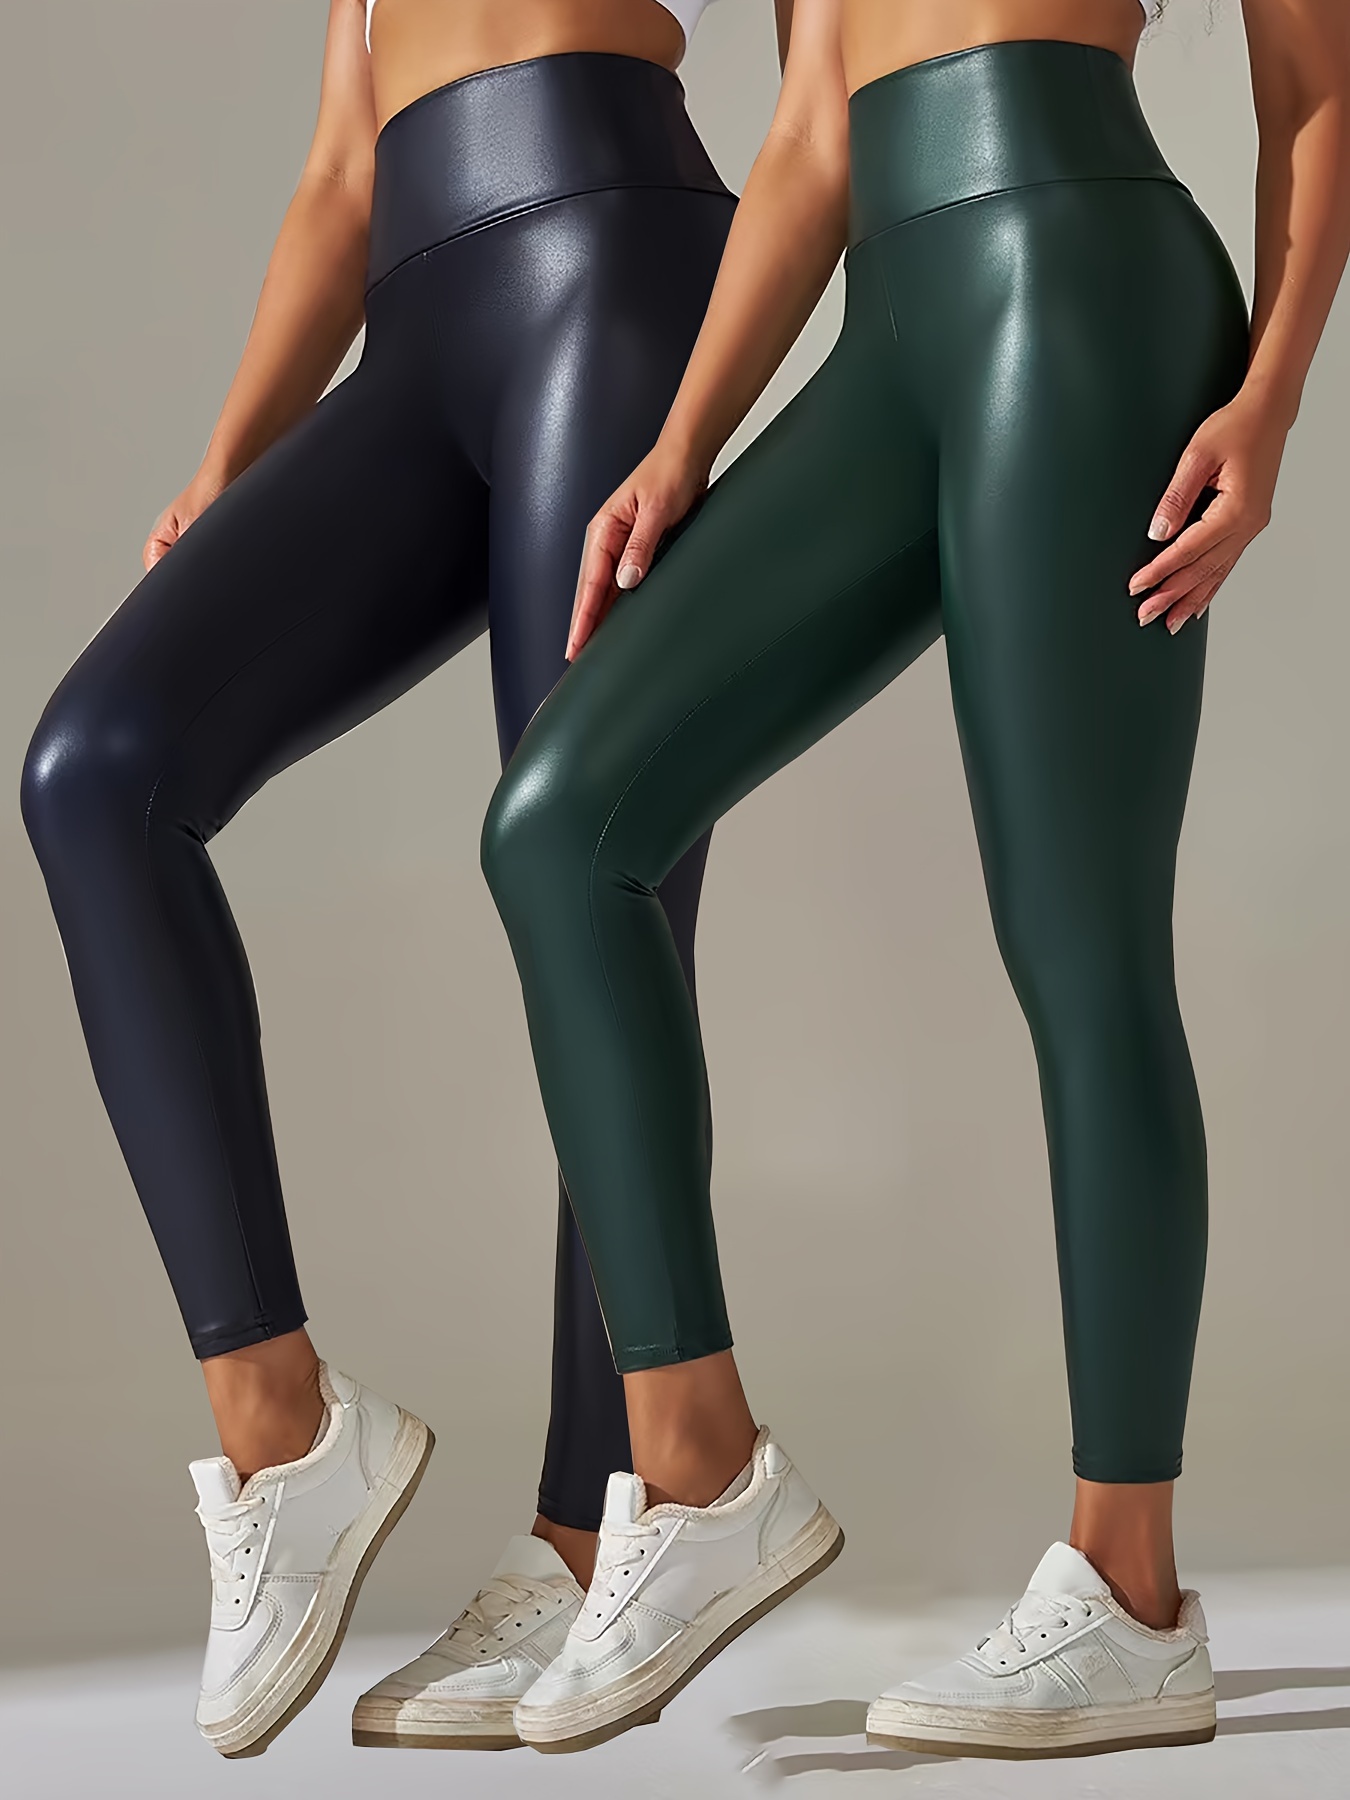 a new day Leather Athletic Leggings for Women